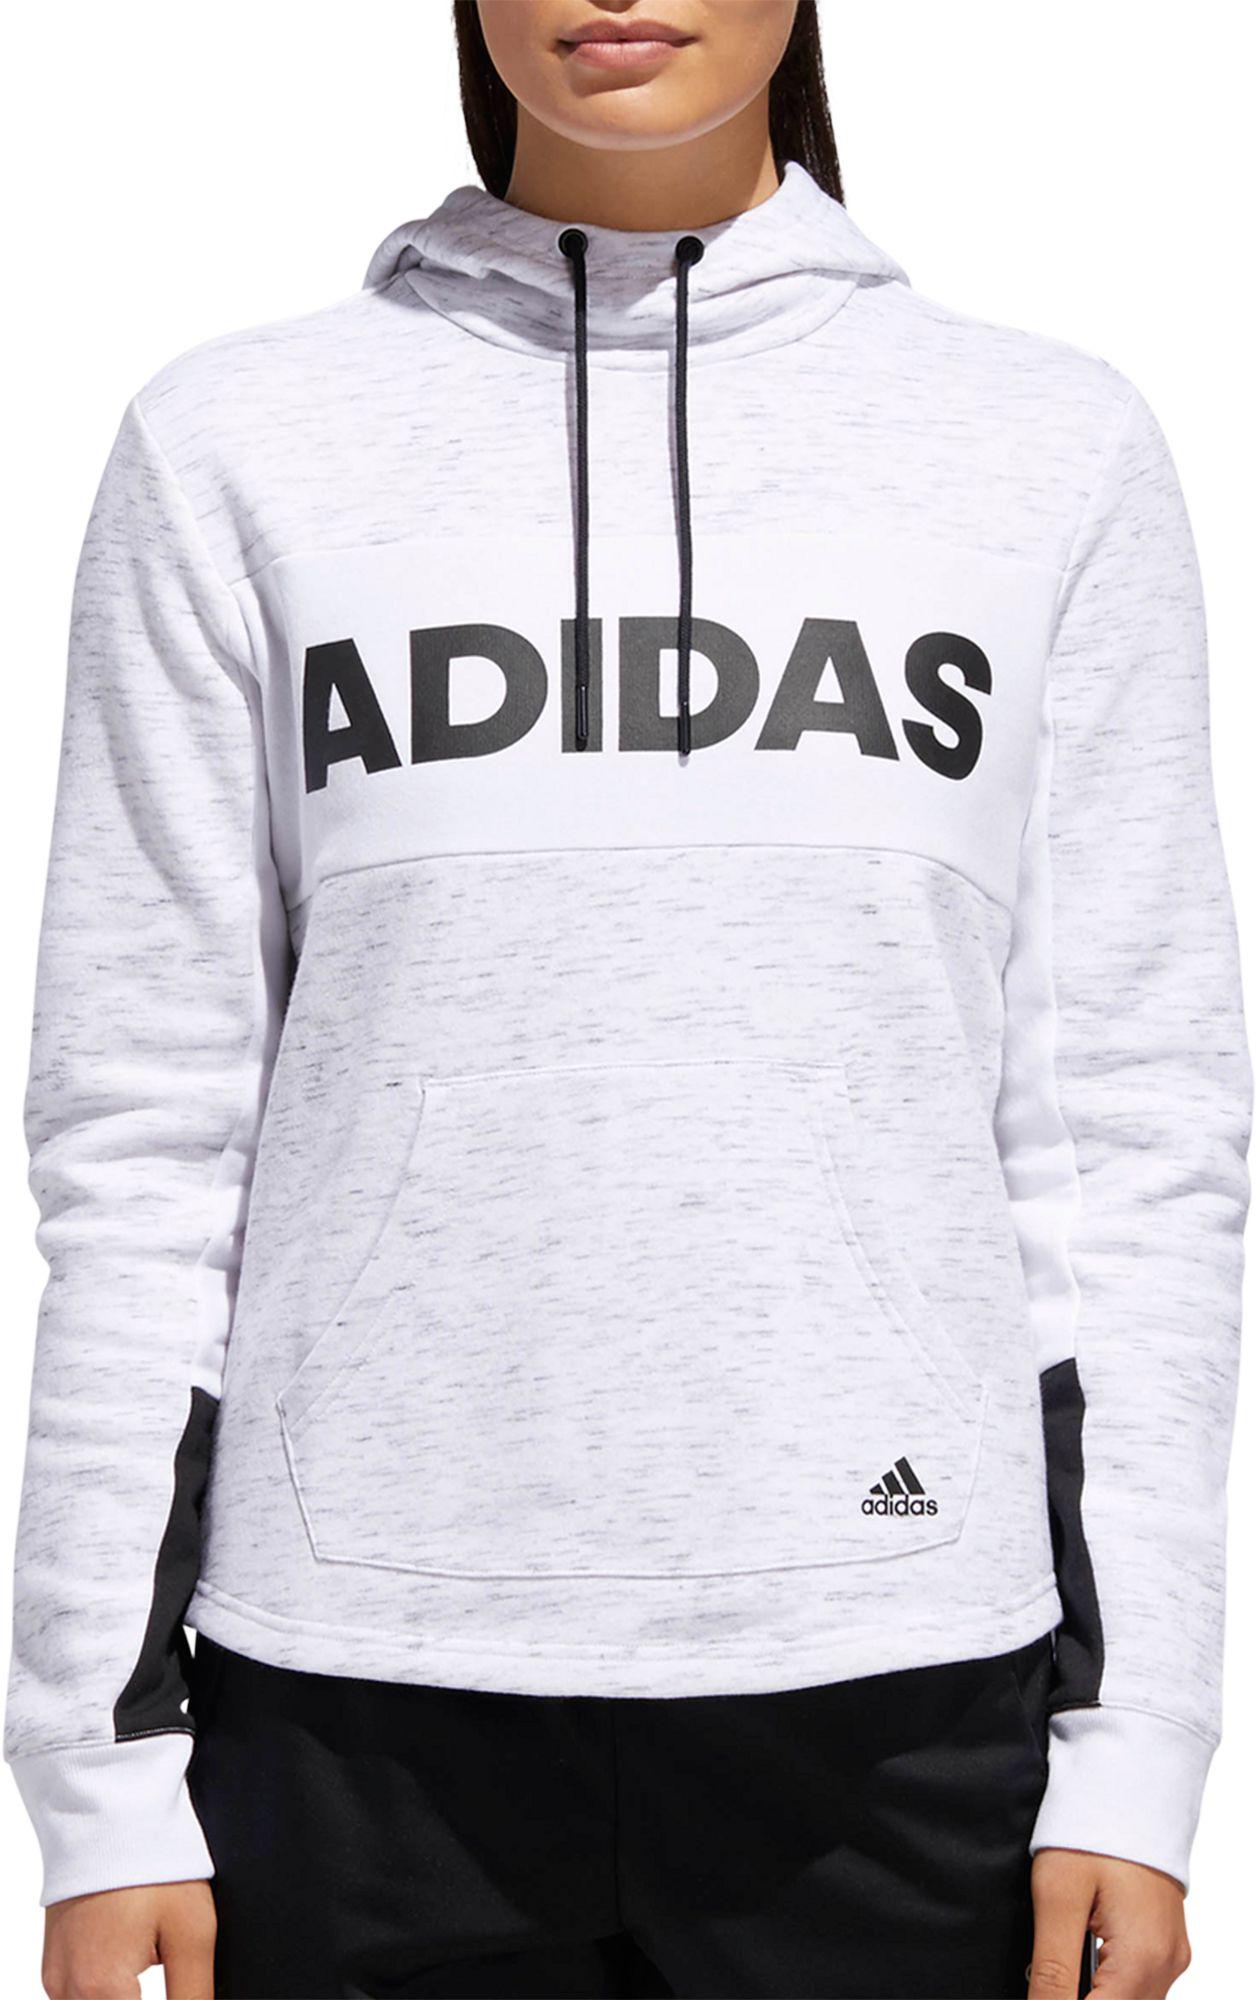 adidas Post Game Fleece Pullover Hoodie in White/Black (White) - Lyst